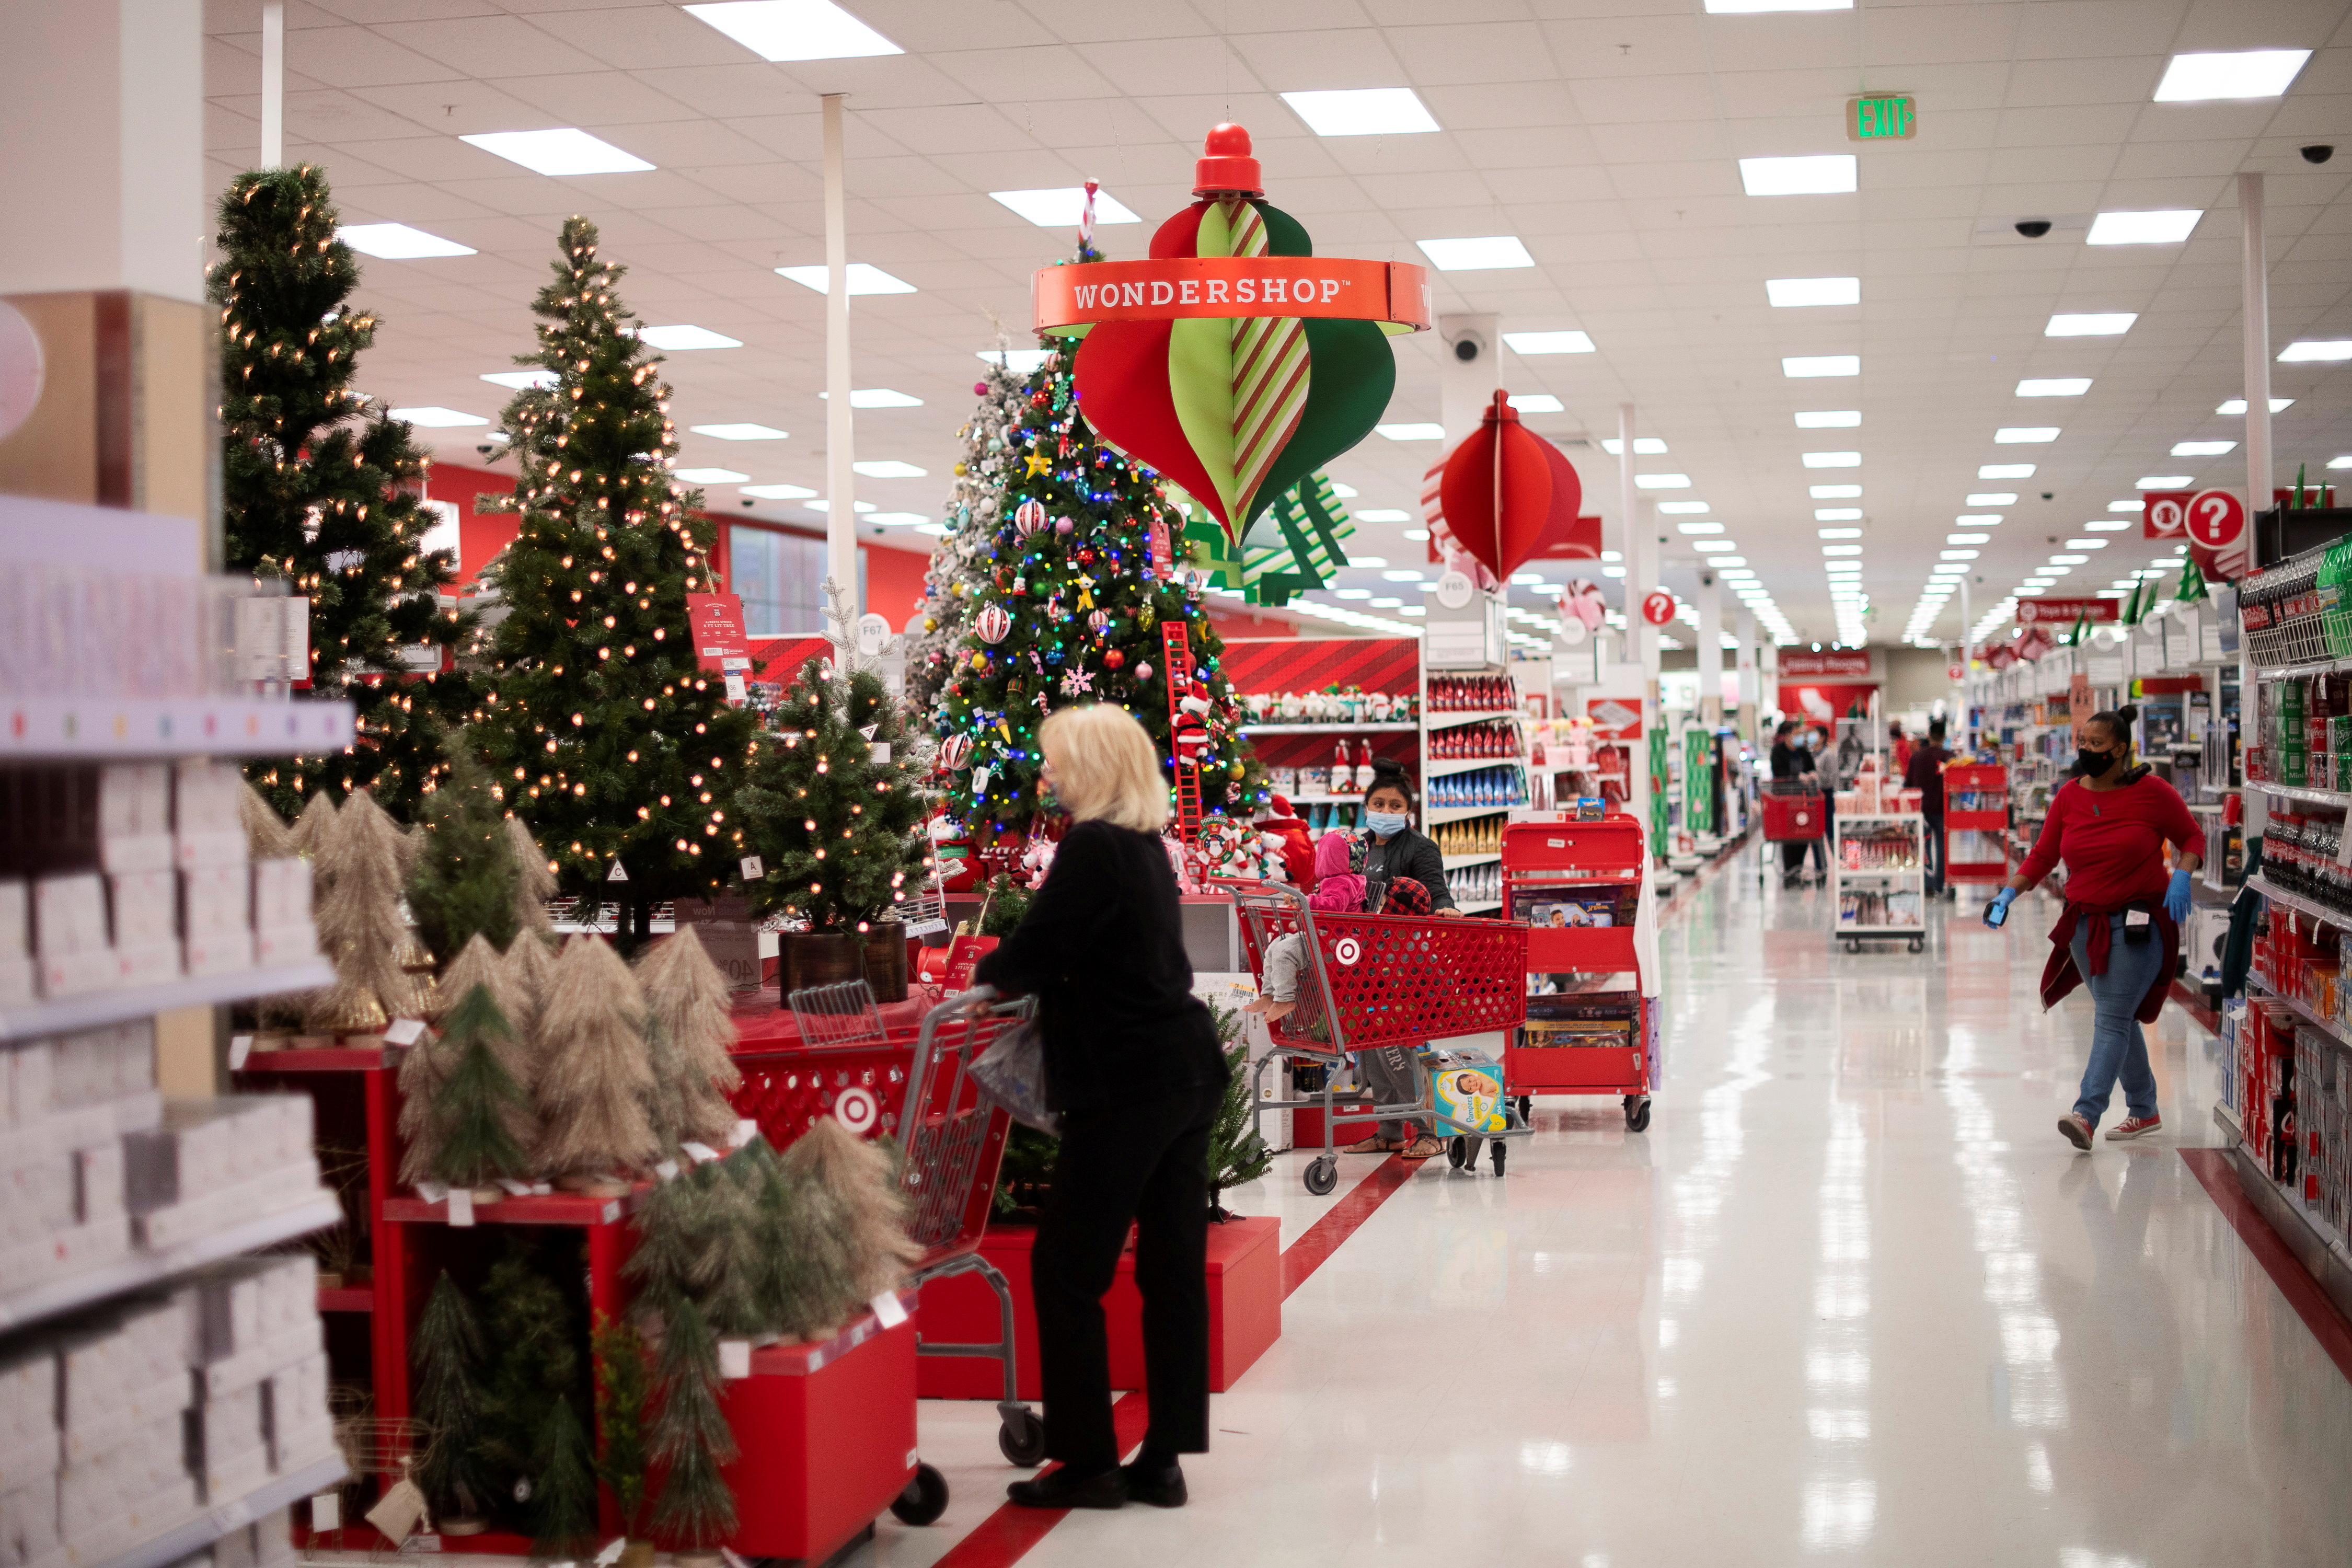 Shoppers browse merchandise beside a Christmas tree display at a Target store in King of Prussia